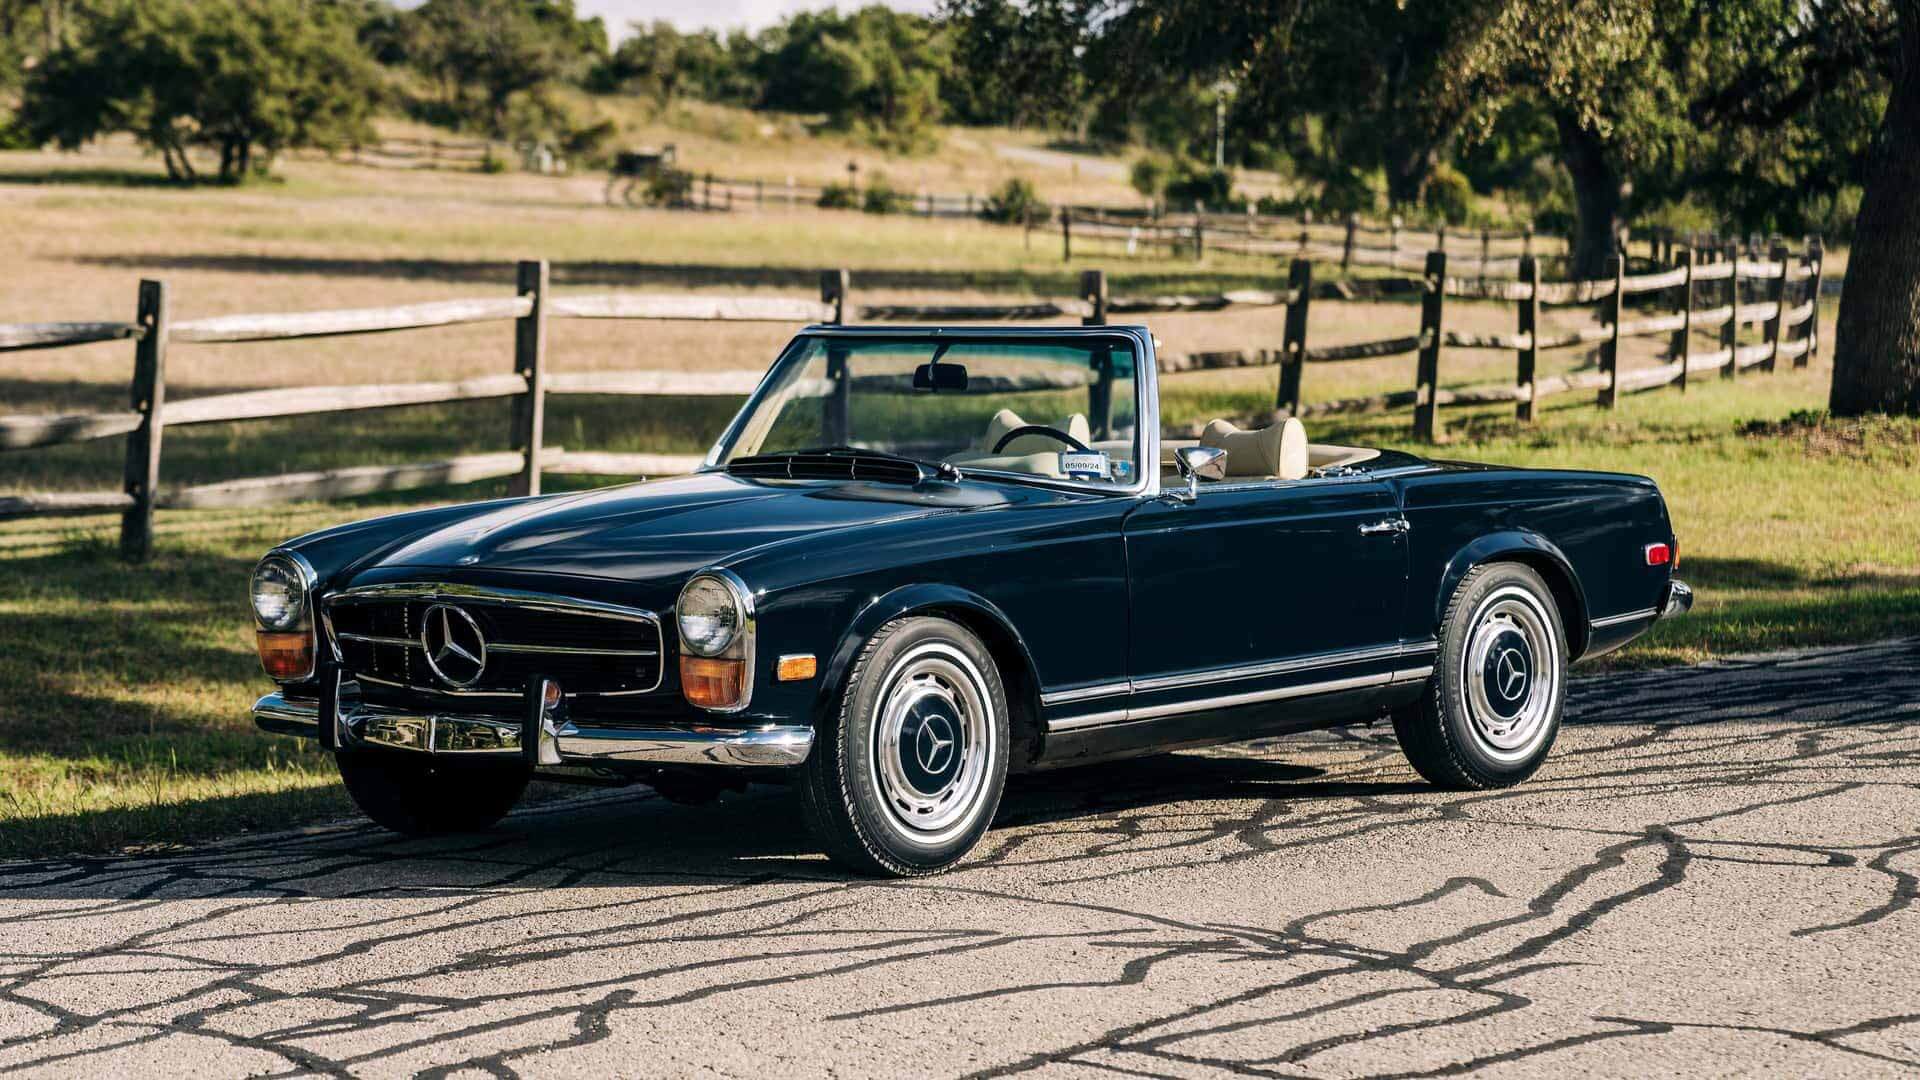 The classic Mercedes-Benz 280SL has been turned into a luxury electric car